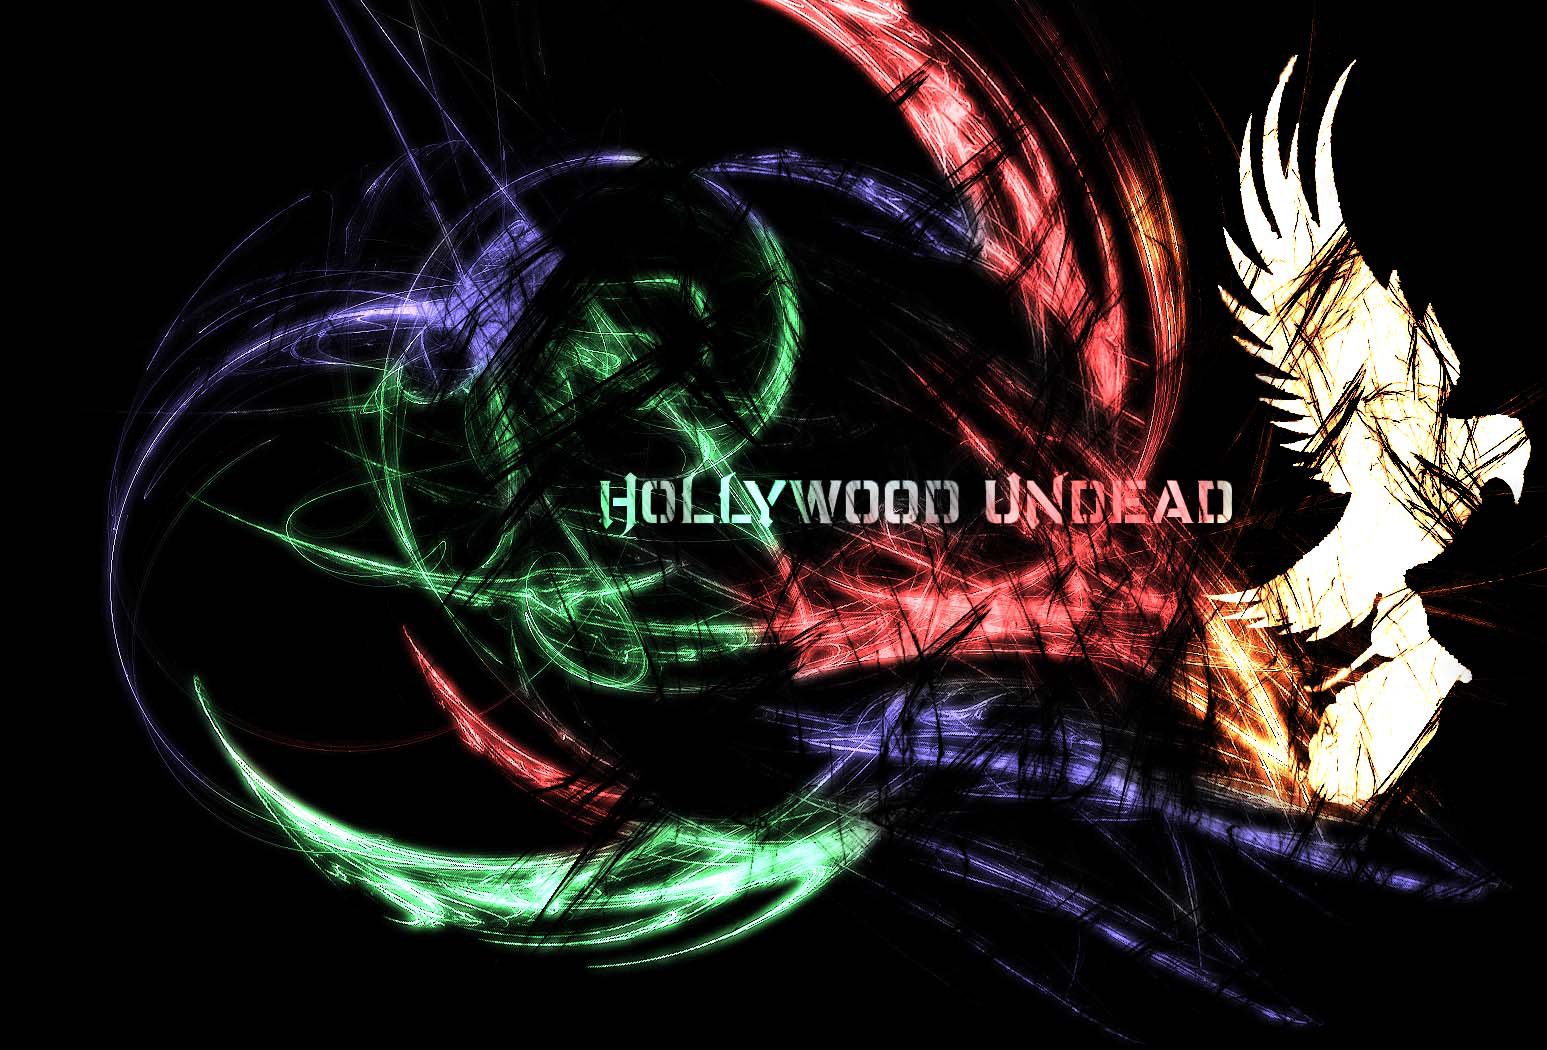 1000 images about Hollywood undead onLogos